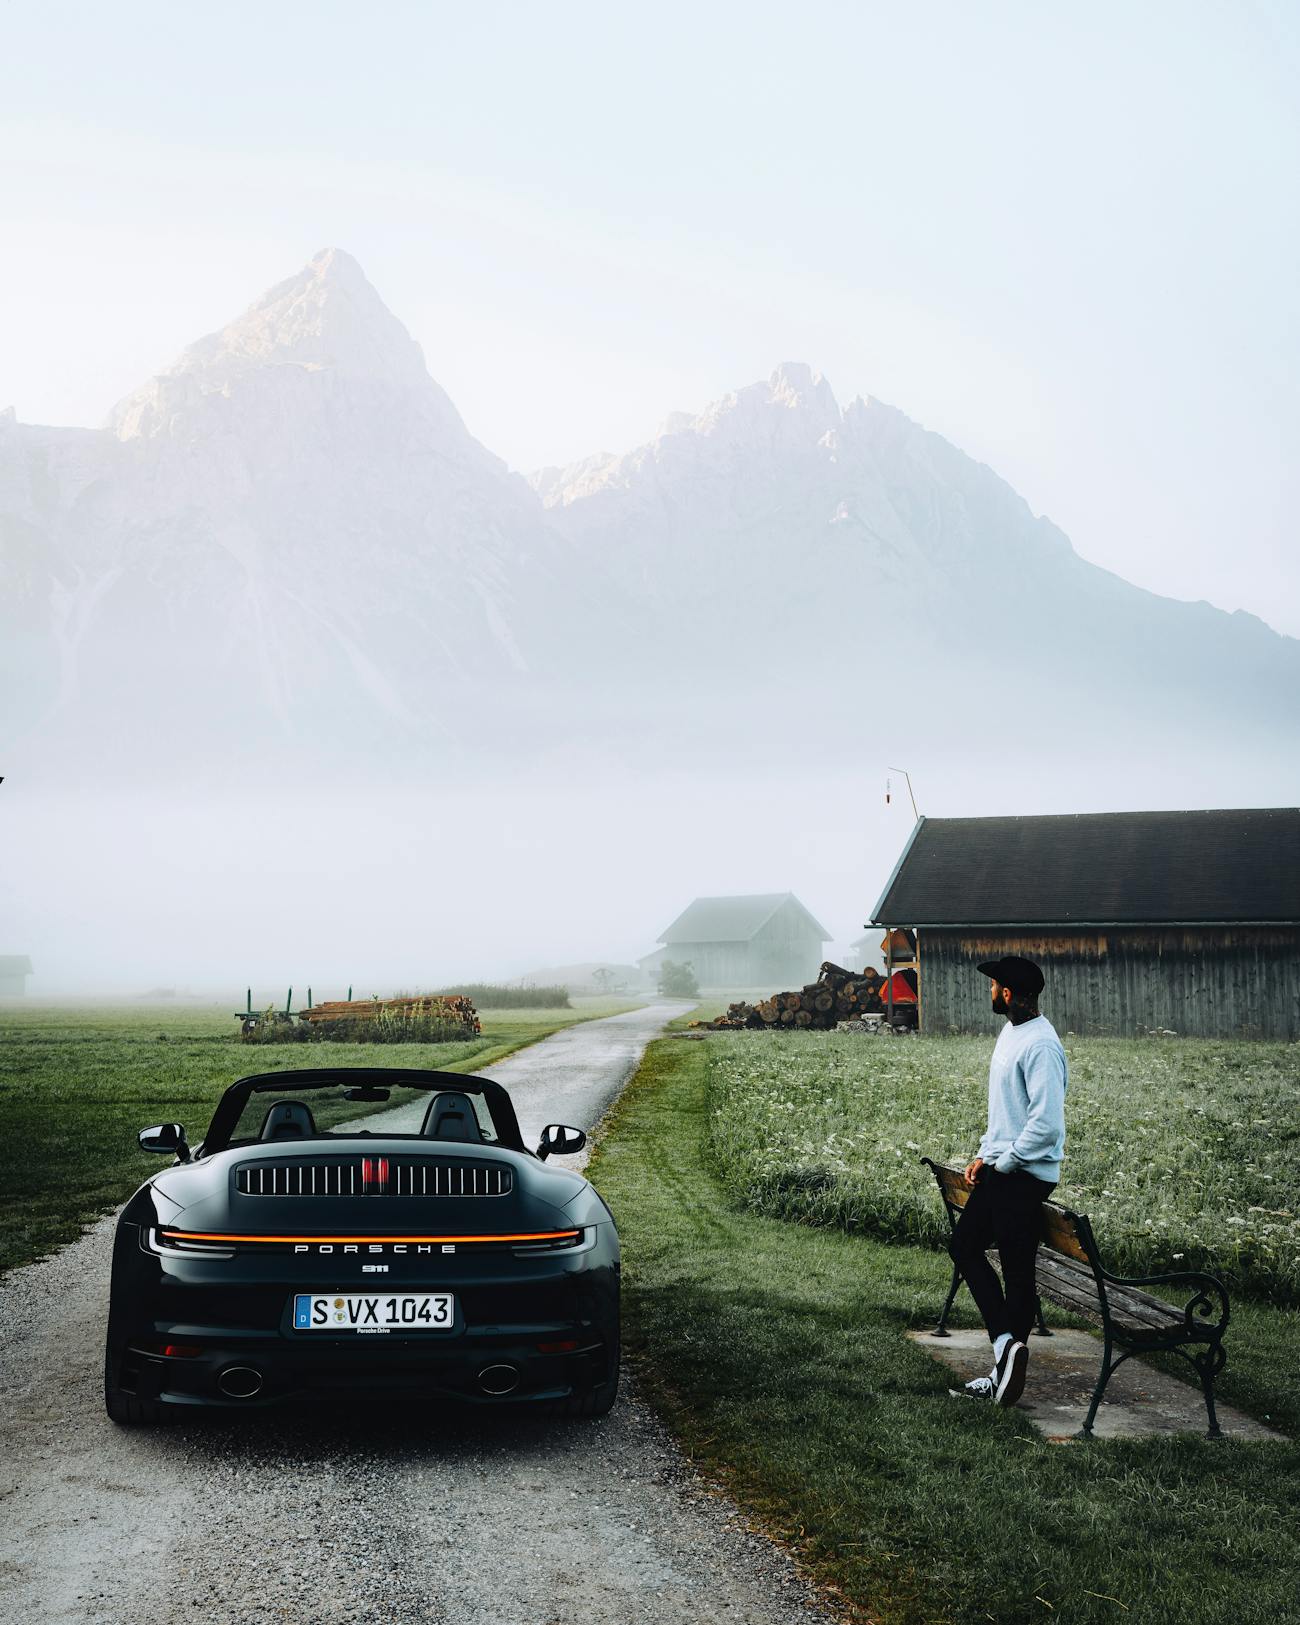 Man stands next to 911 Cabriolet, misty mountain in background